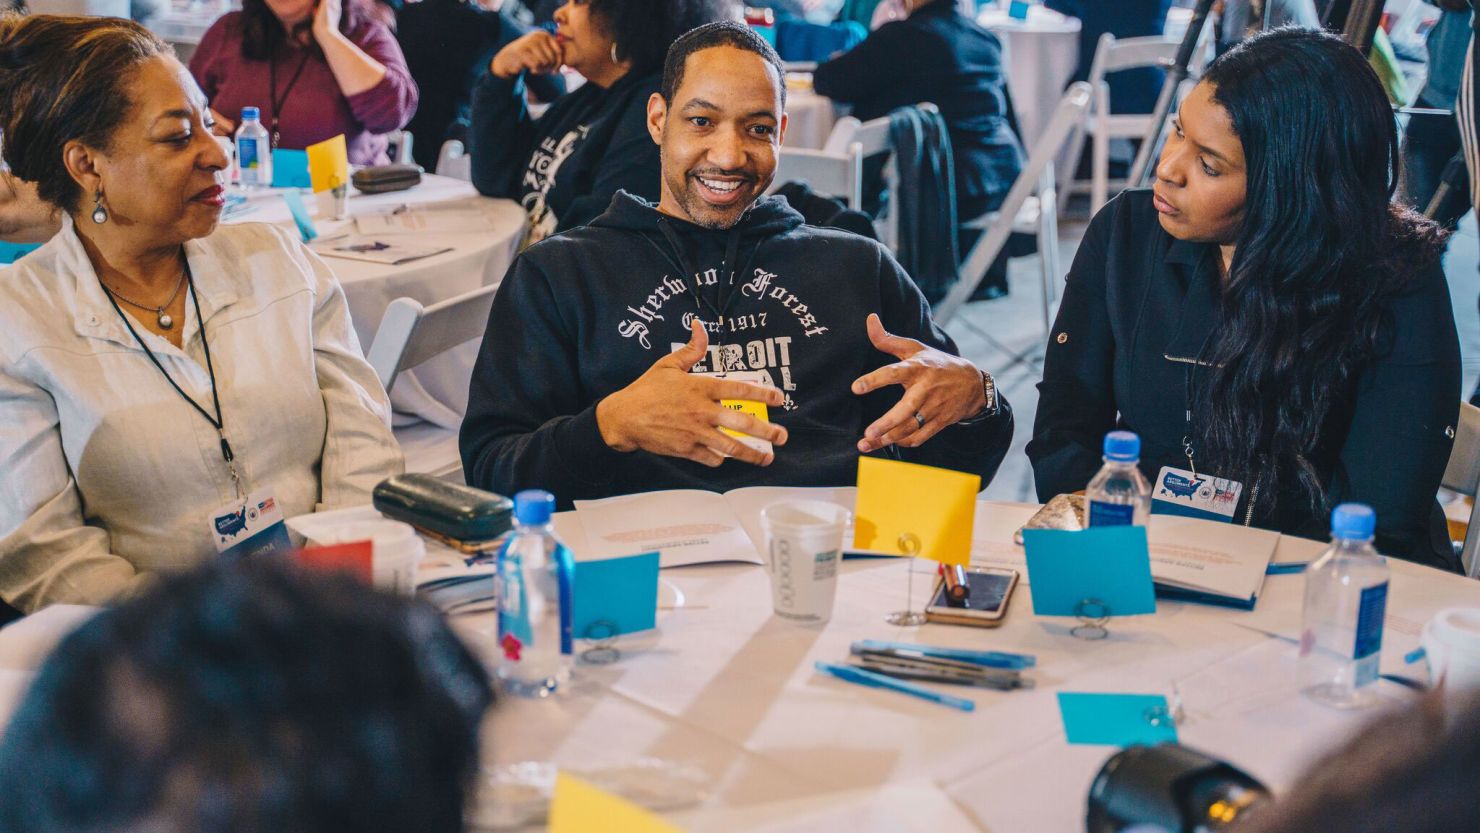 The Better Arguments Project joined with a local partner, the Urban Consulate, to host a public event in Detroit to address tensions between long-time Detroit residents and newcomers.